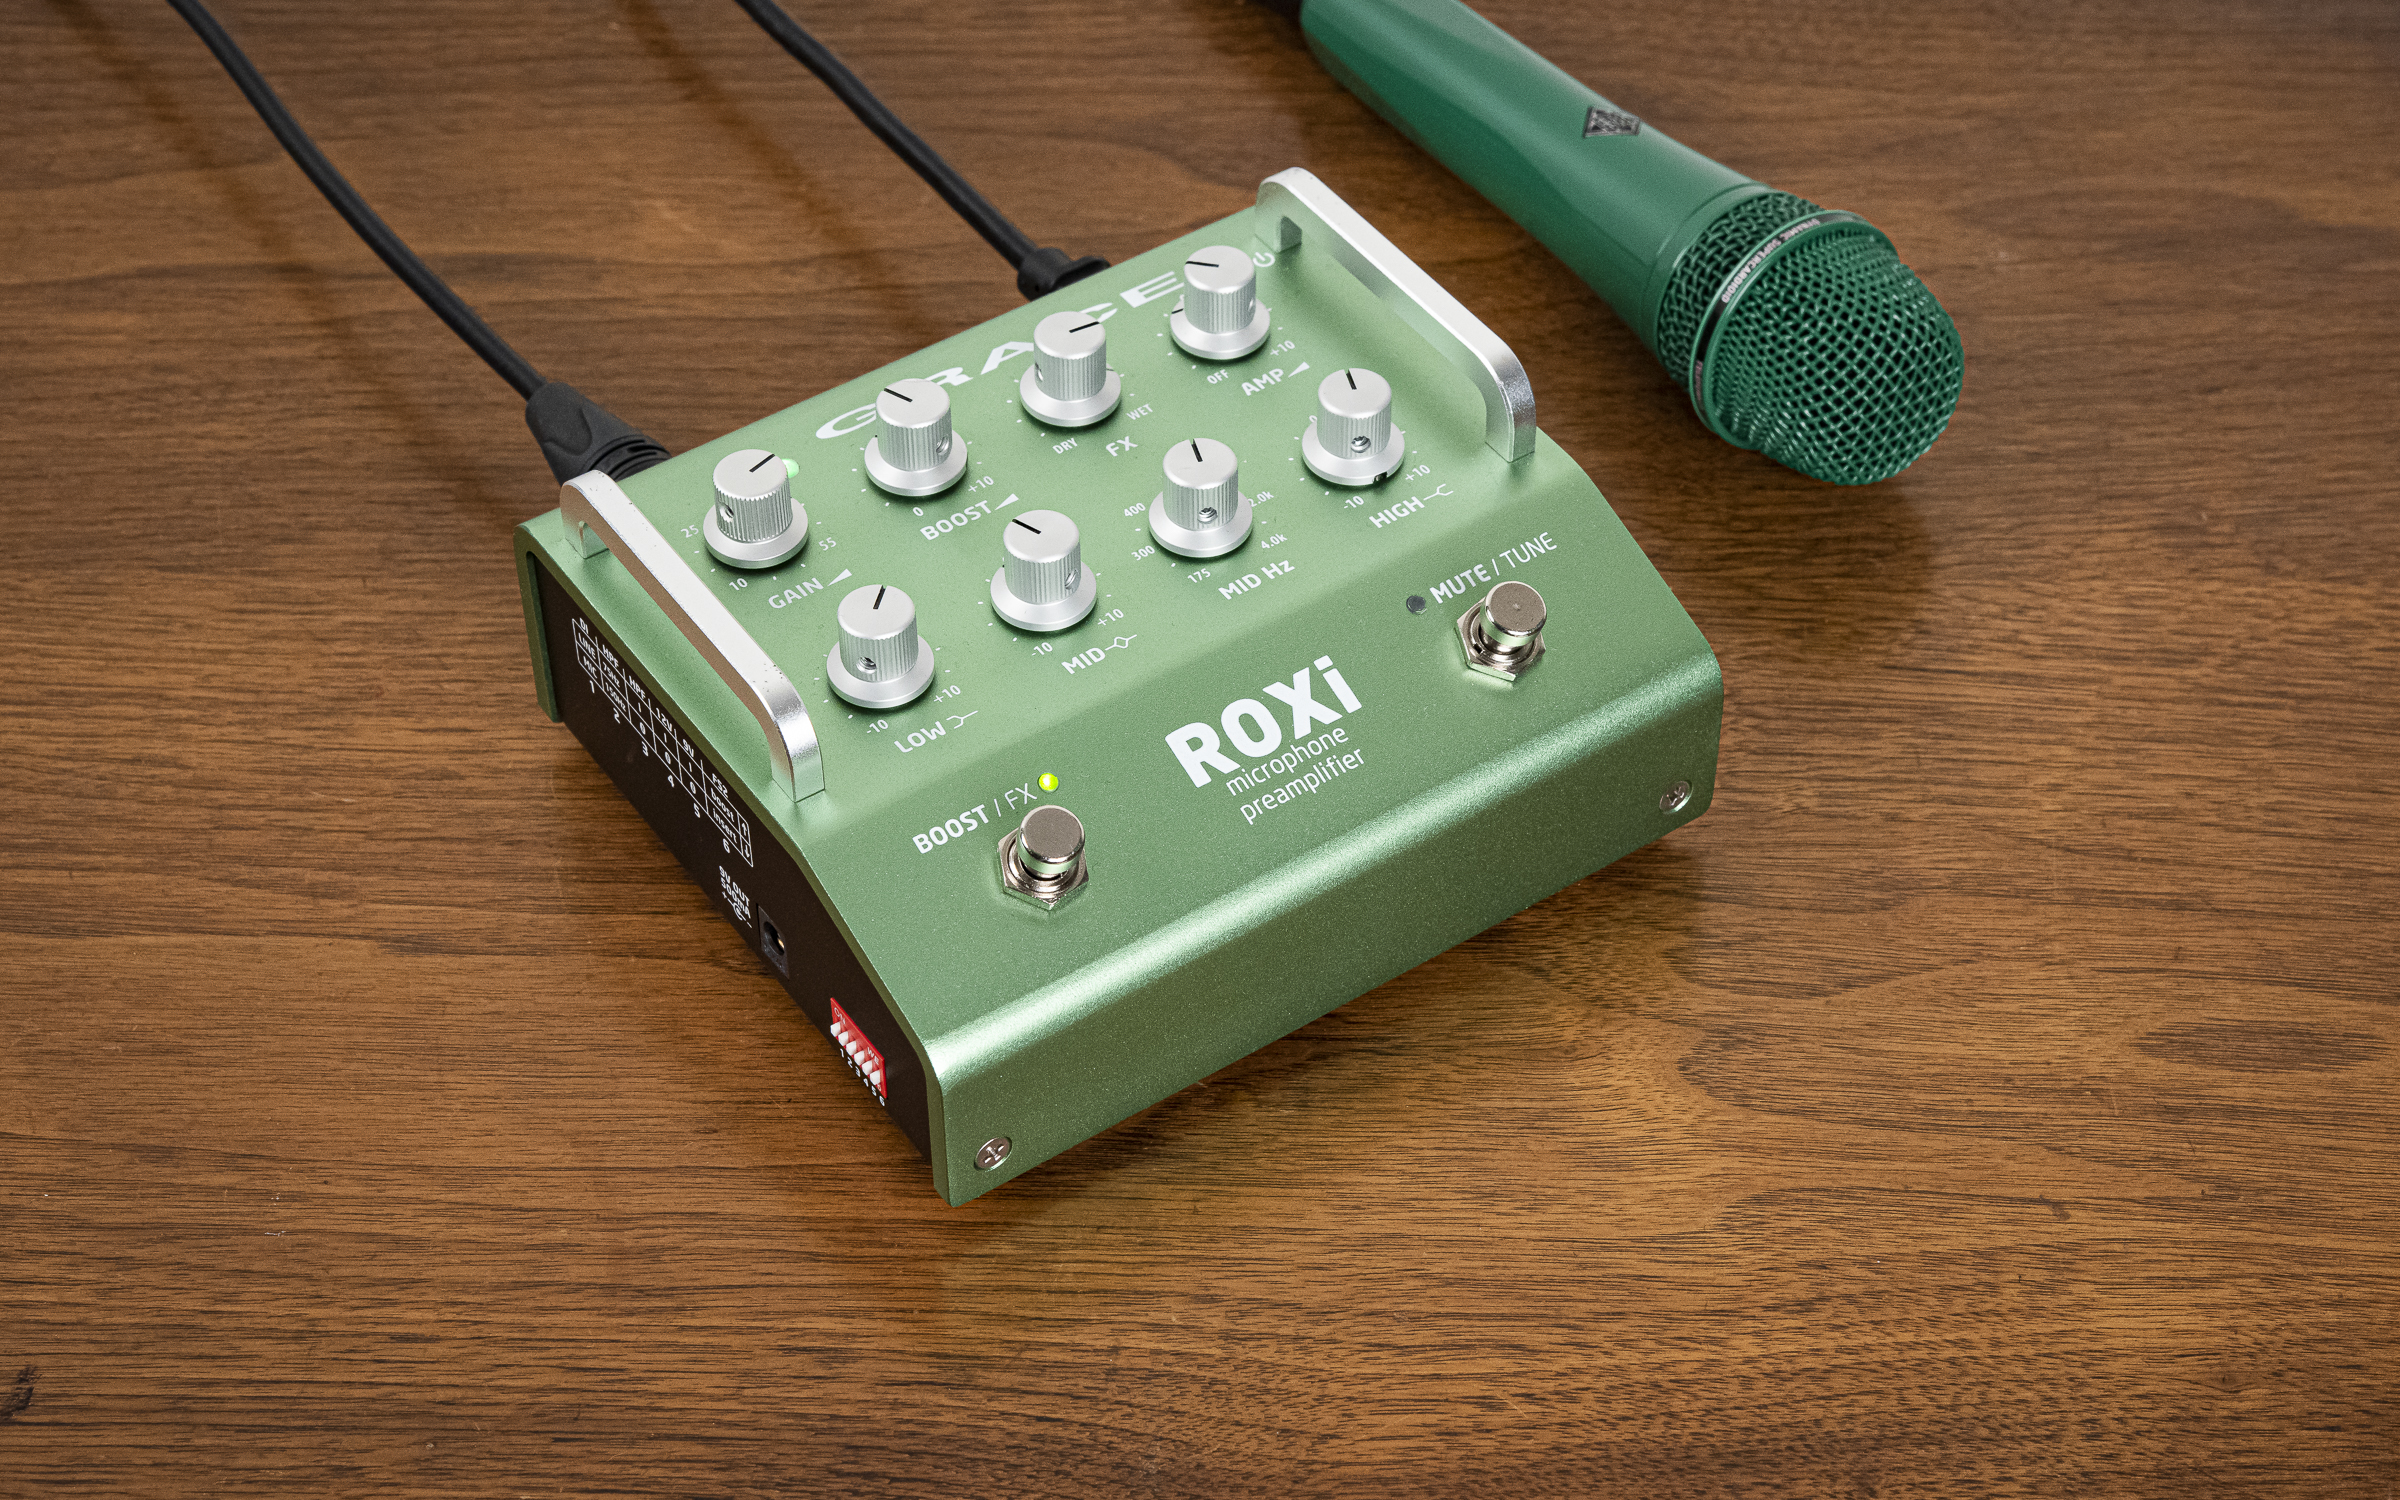 Why a MIC PREAMP PEDAL?